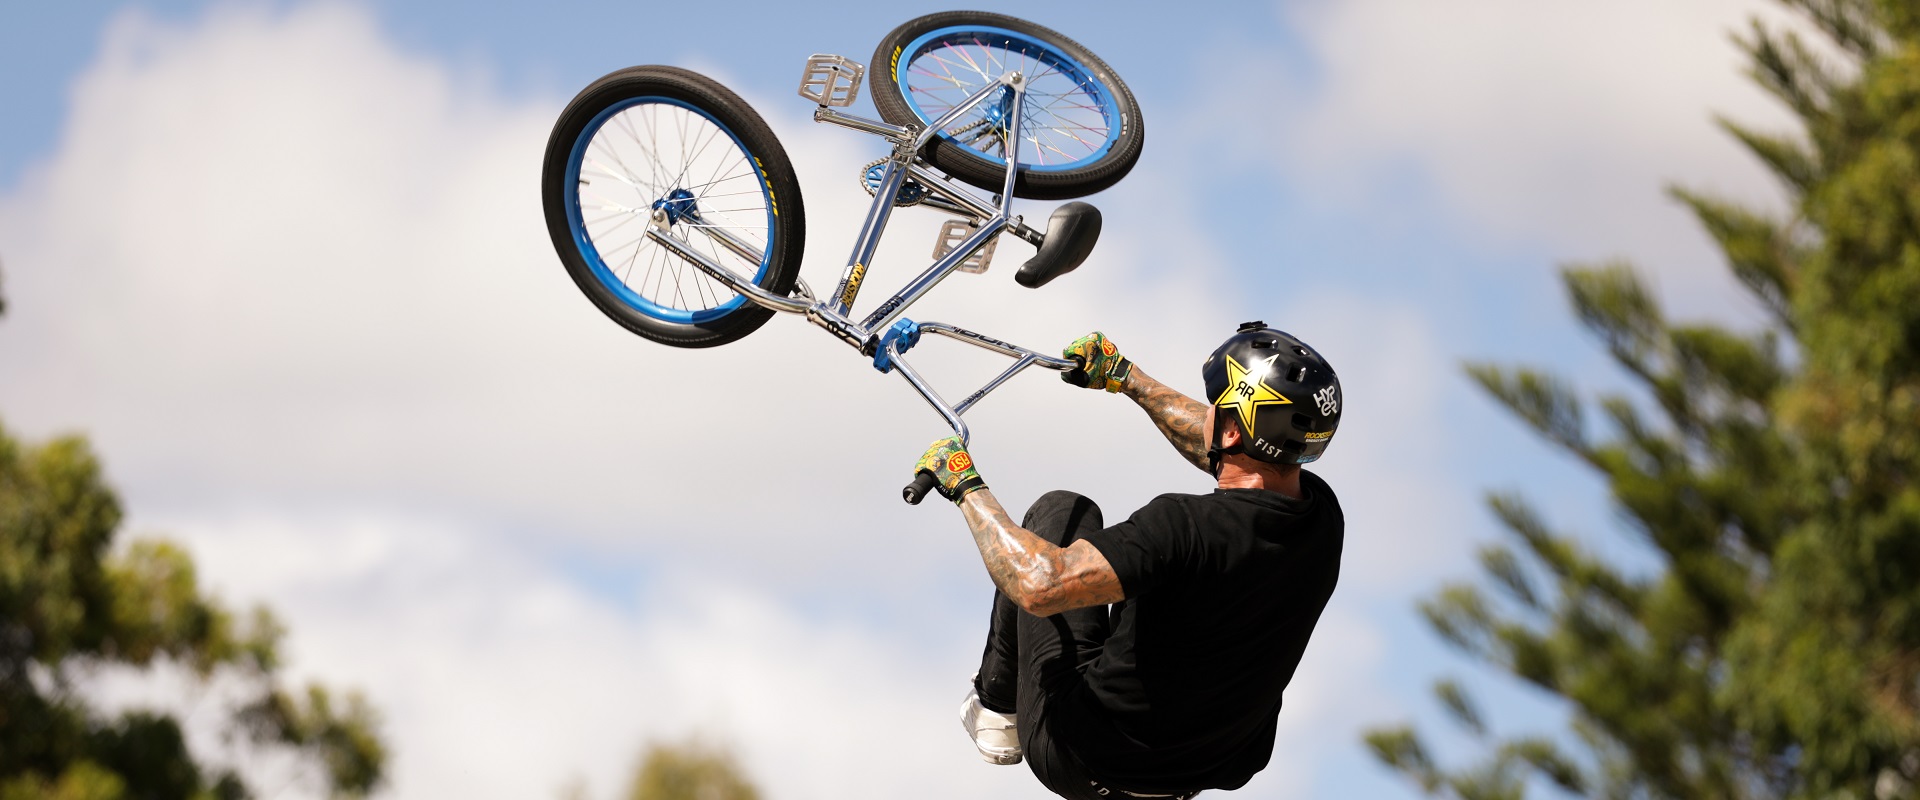 bmx athlete up high in the air holding on to his BMX